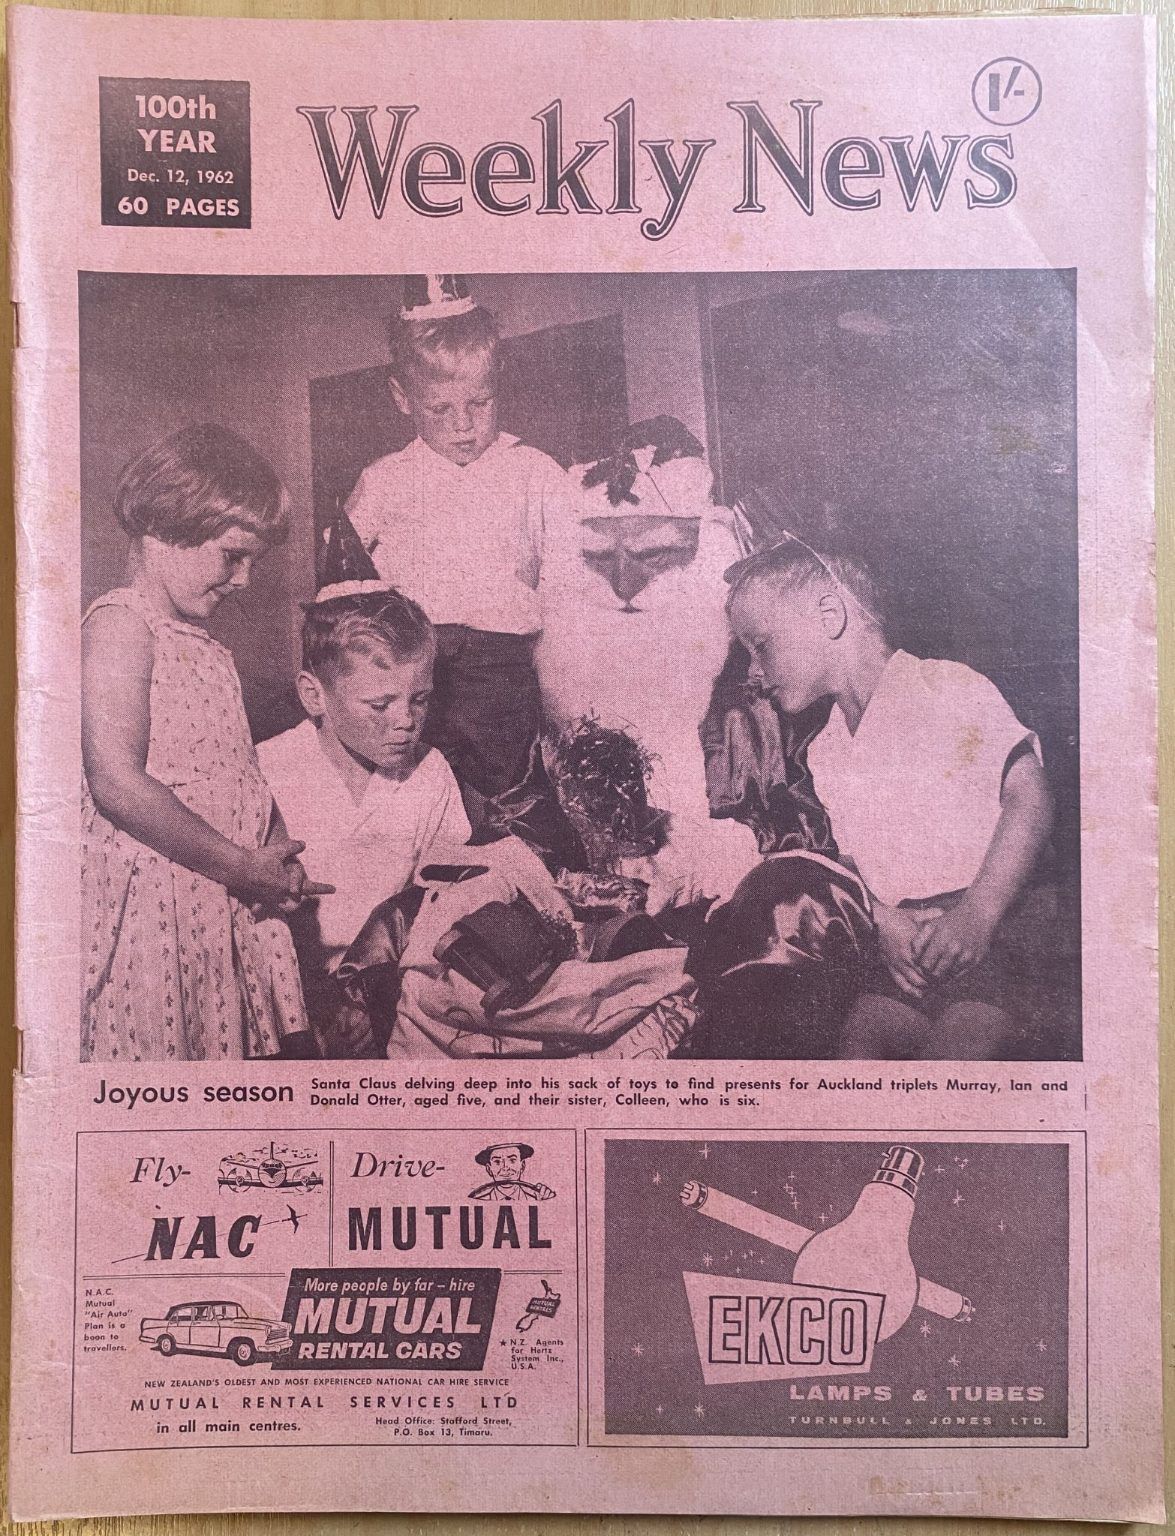 OLD NEWSPAPER: The Weekly News, No. 5168, 12 December 1962